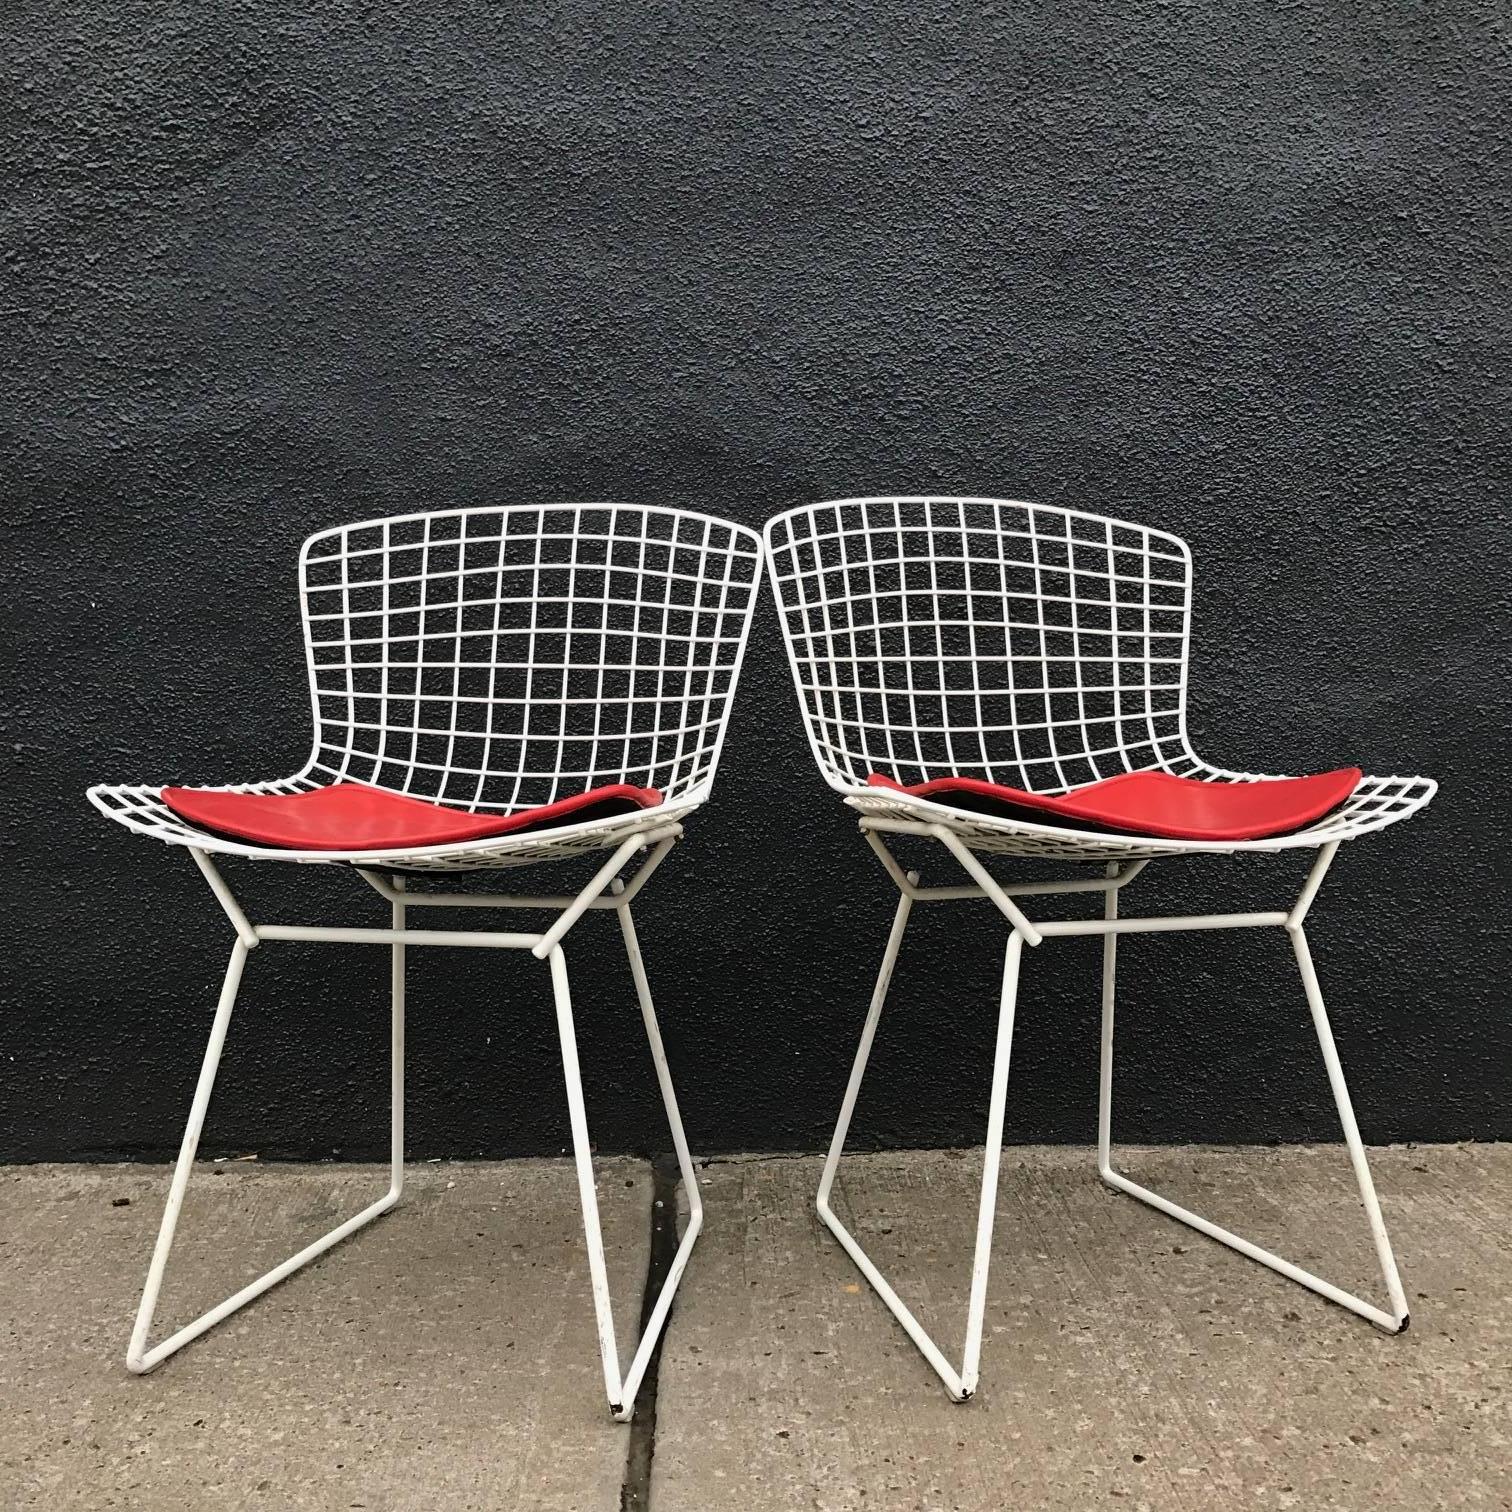 20th Century Mid-Century Knoll Bertoia Wire Chairs in White with Red Seat Pads